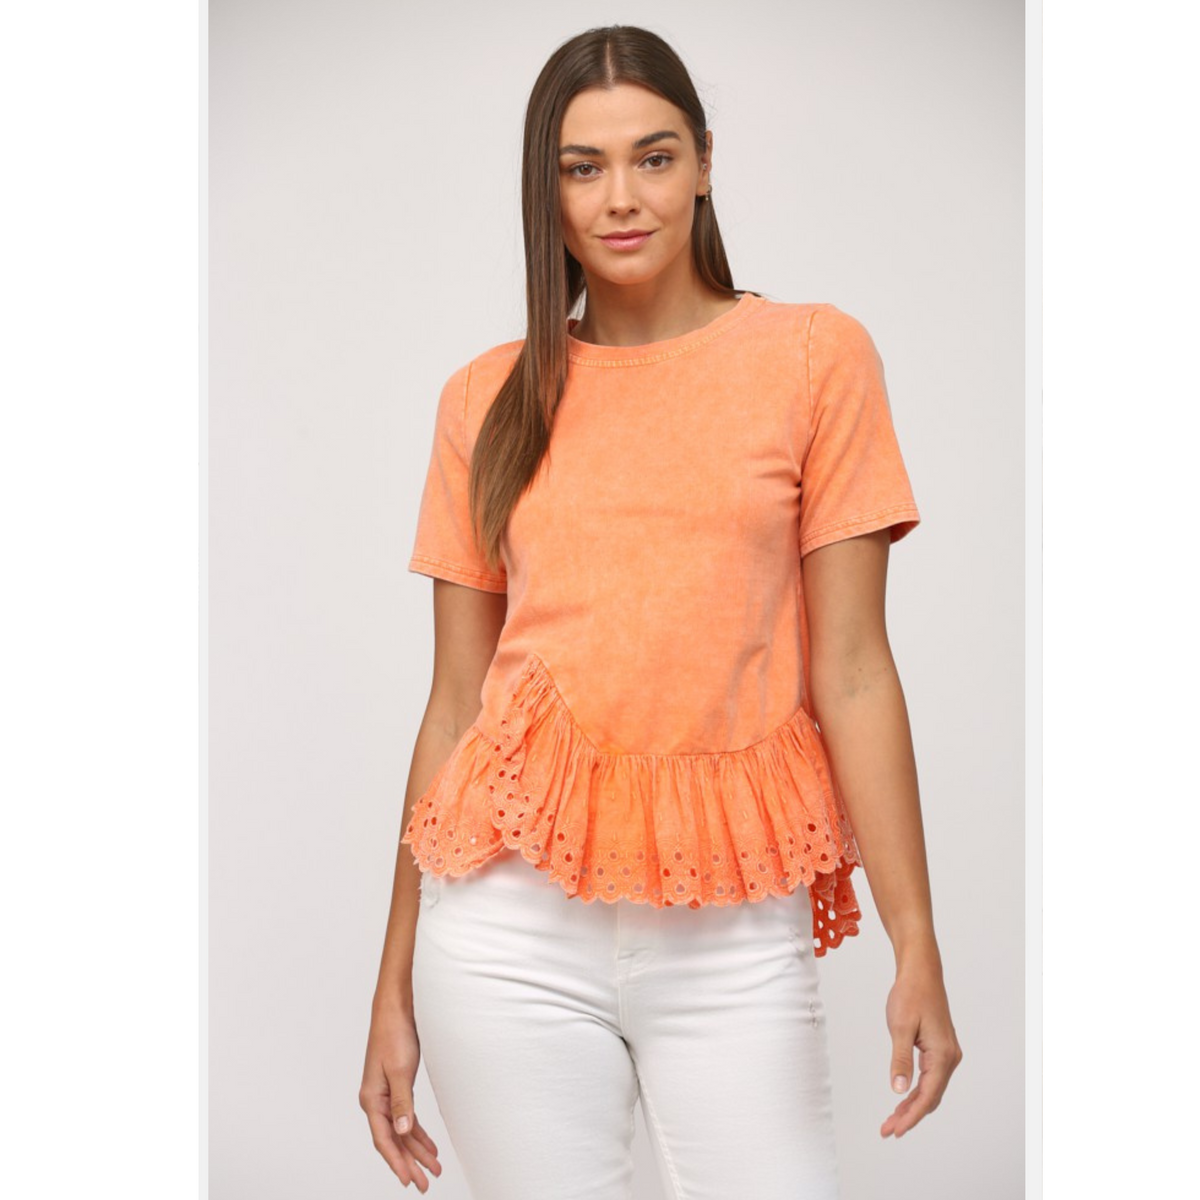 Lace Trimmed Ruffle Hem Washed Top